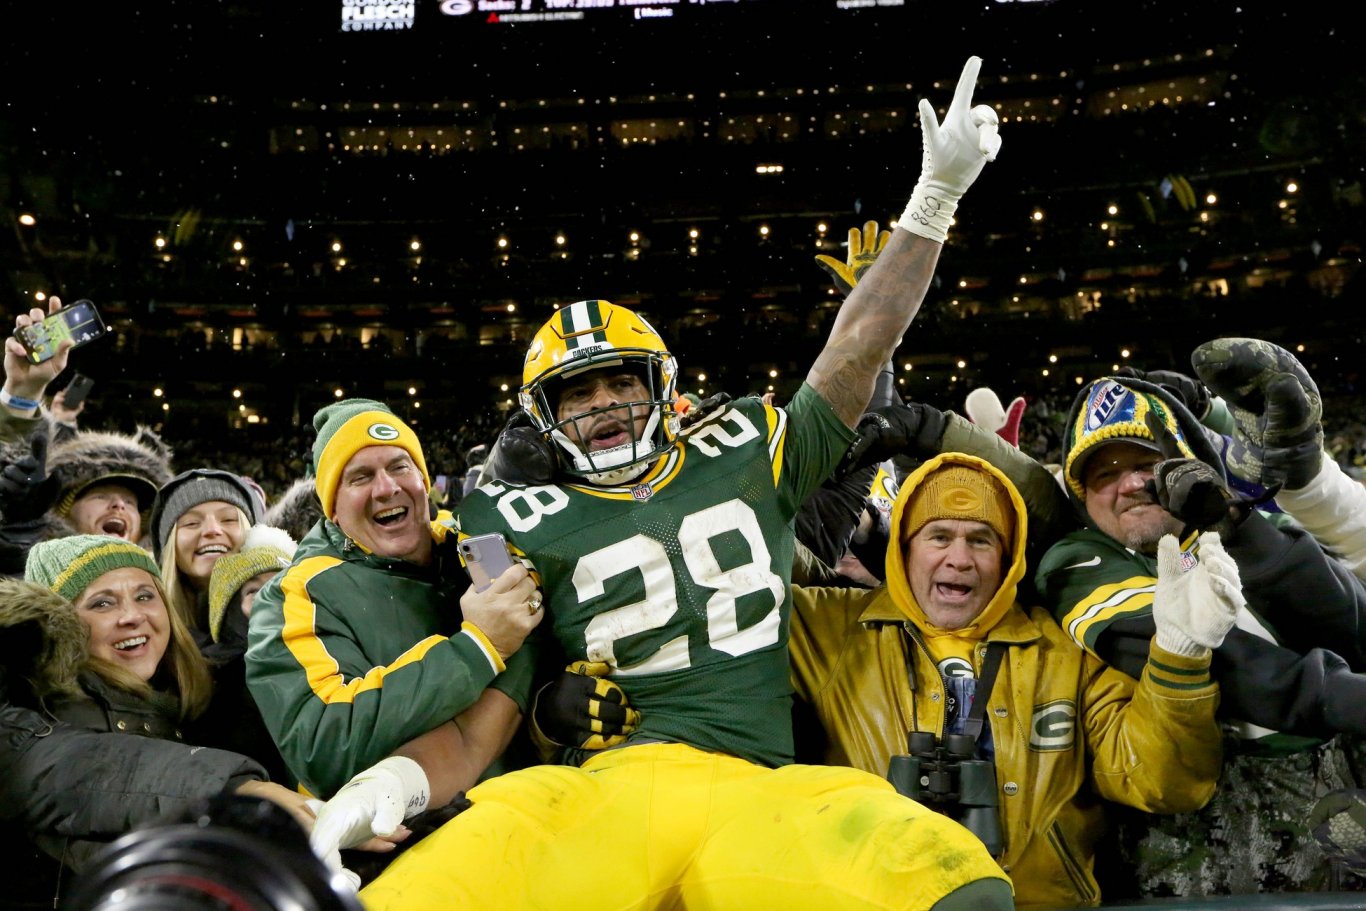 AJ Dillon injury: Packers RB clears concussion protocol, should be